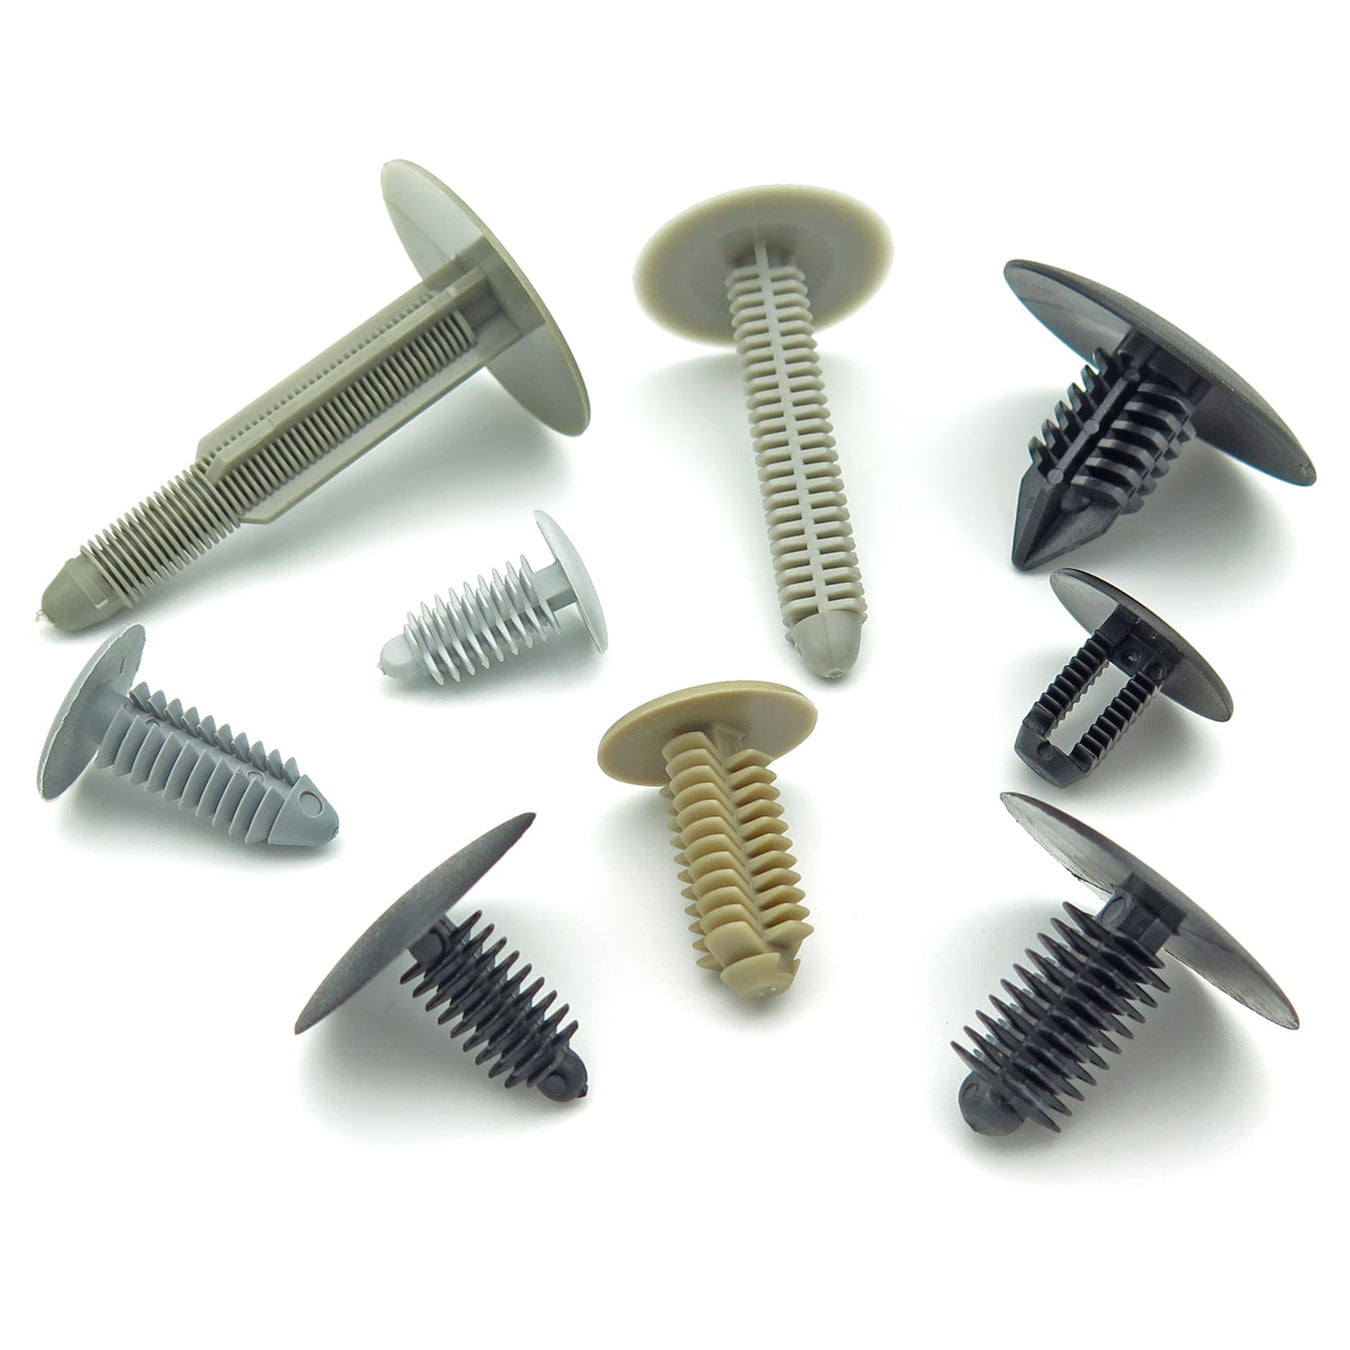 Car Trim Clips & Fasteners - Trade Prices -  —  VehicleClips